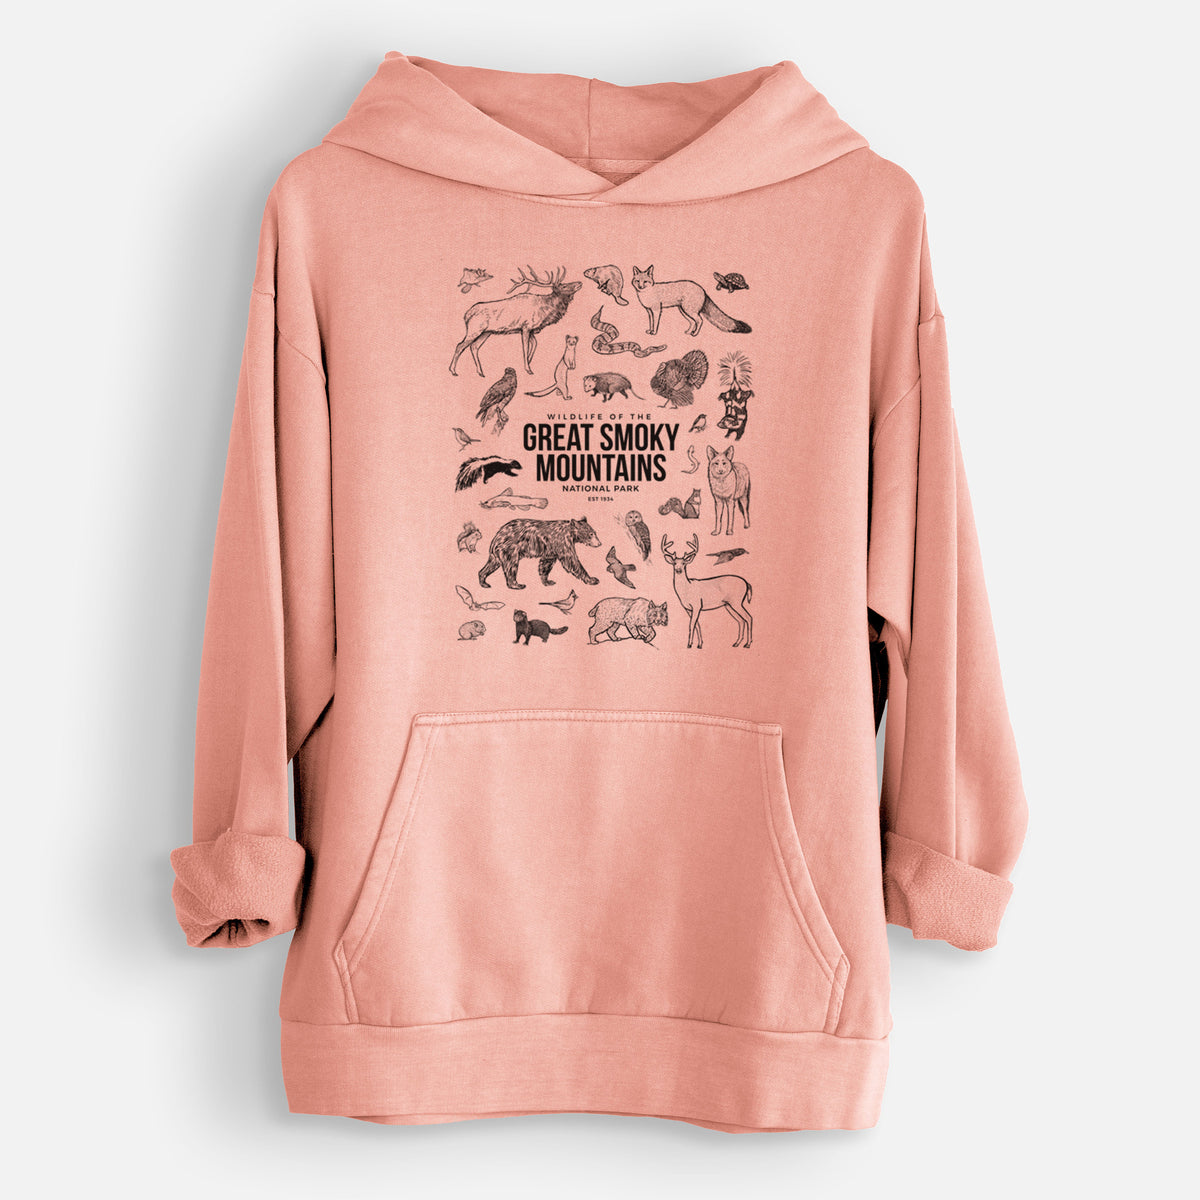 Wildlife of the Great Smoky Mountains National Park  - Urban Heavyweight Hoodie